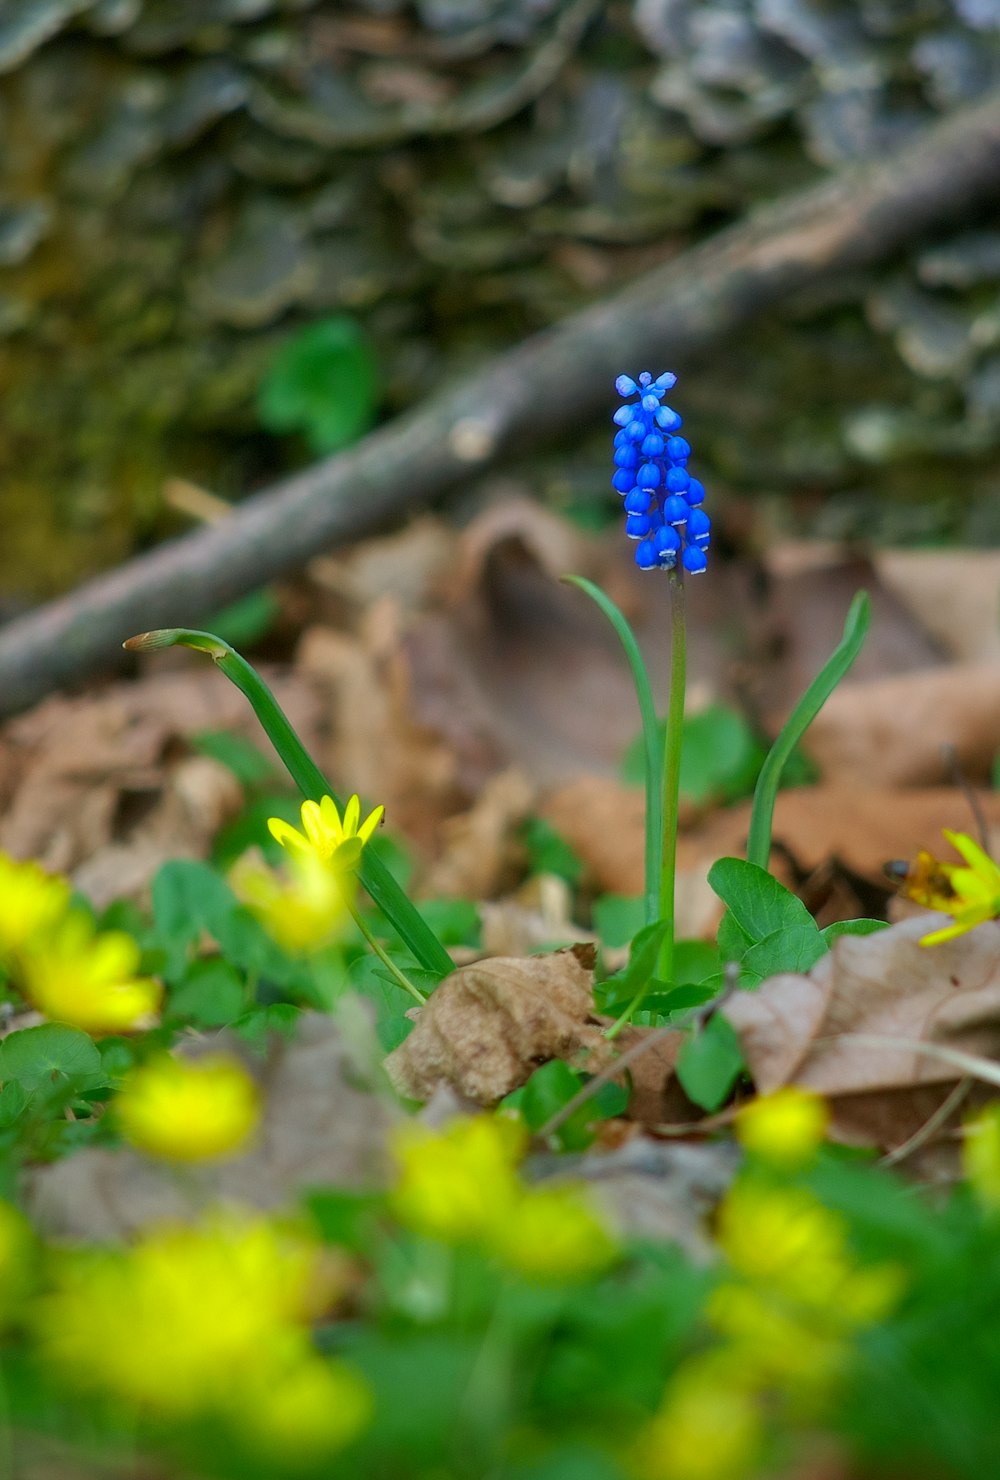 a small blue flower in the middle of some yellow flowers